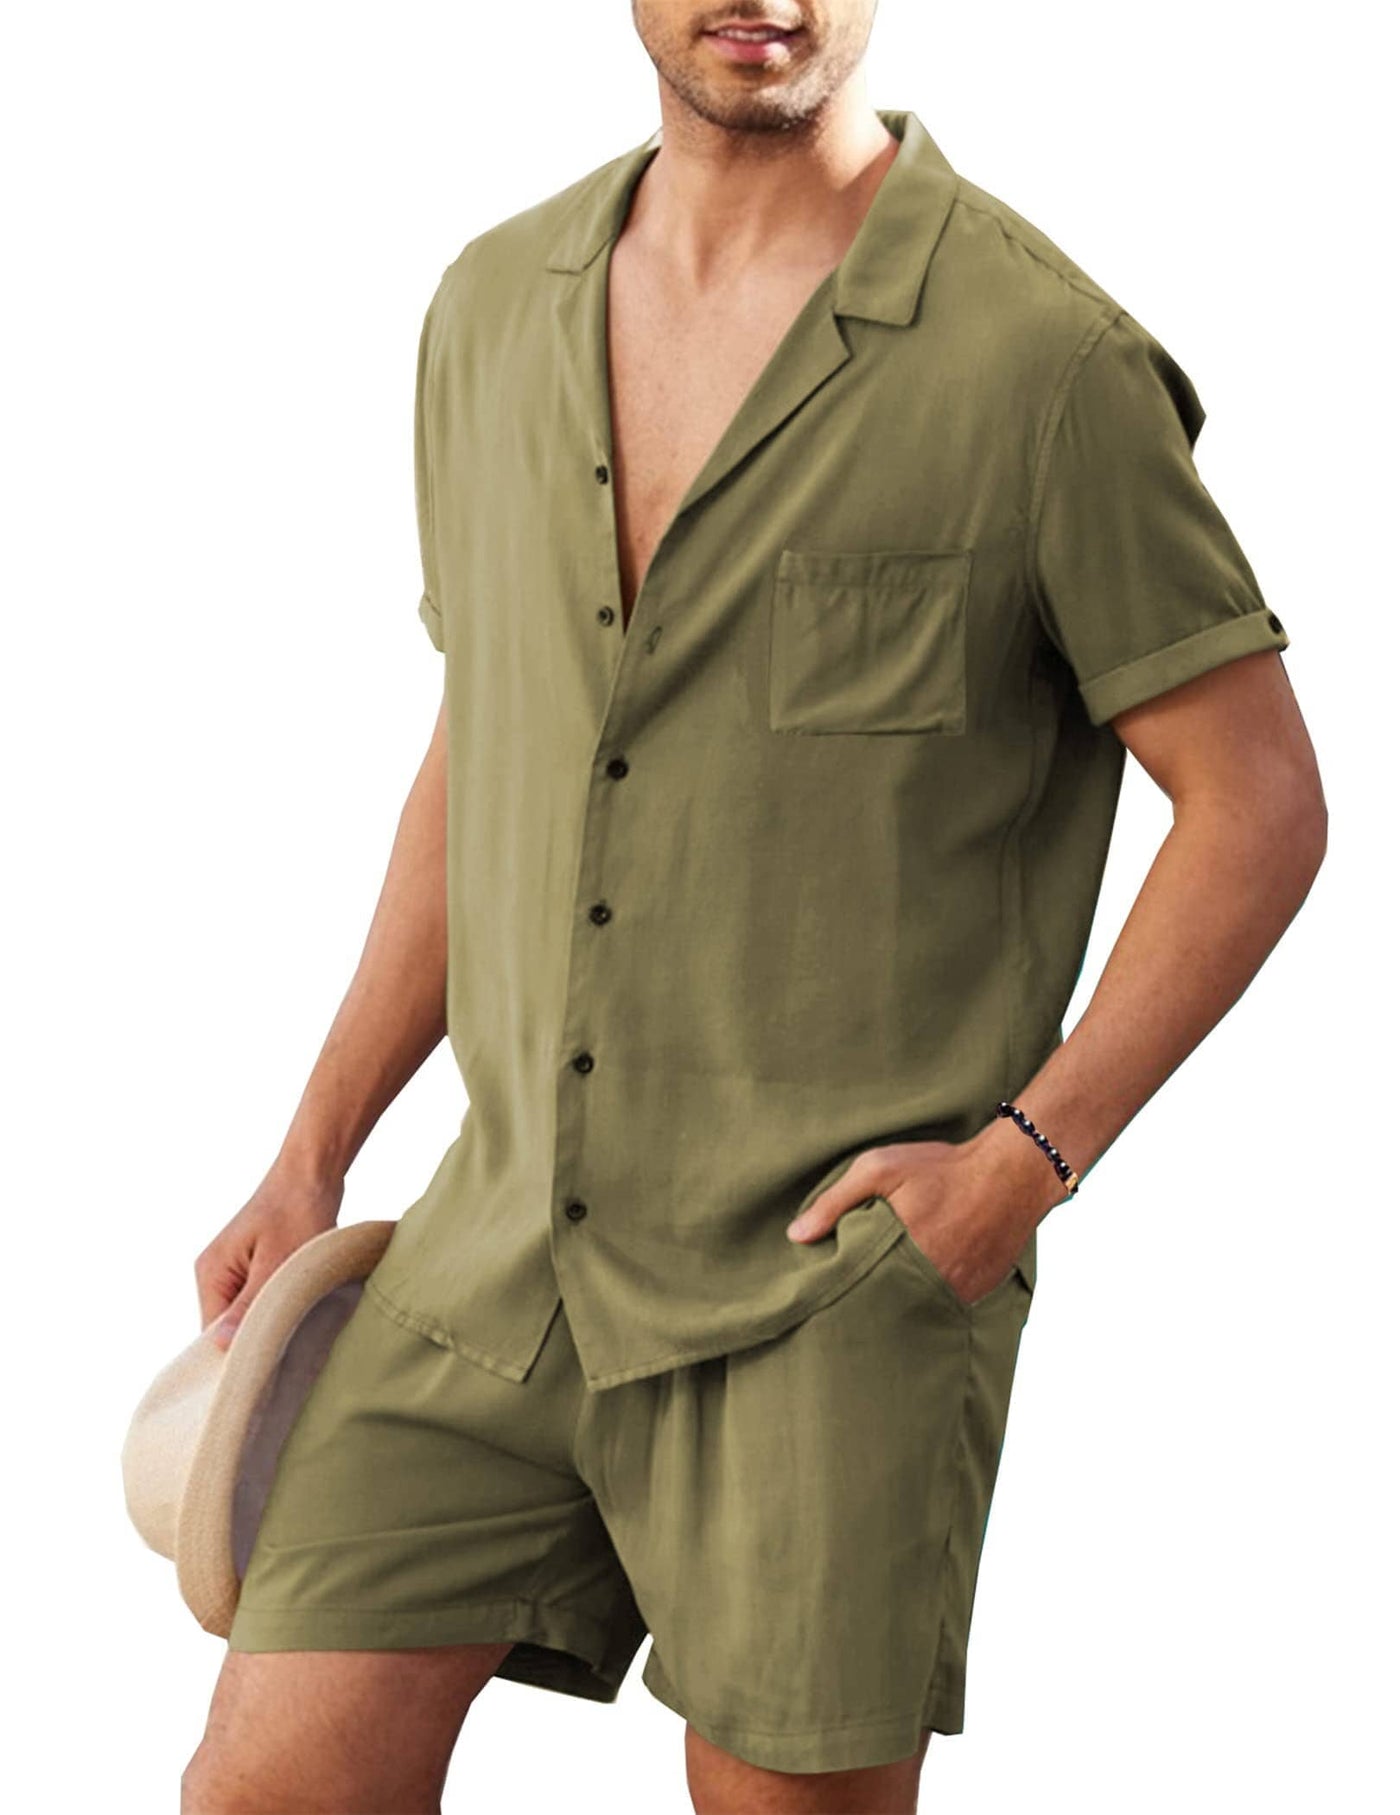 Coofandy 2 Pieces Beach Shirt Set (US Only) Sets coofandy Army Green S 